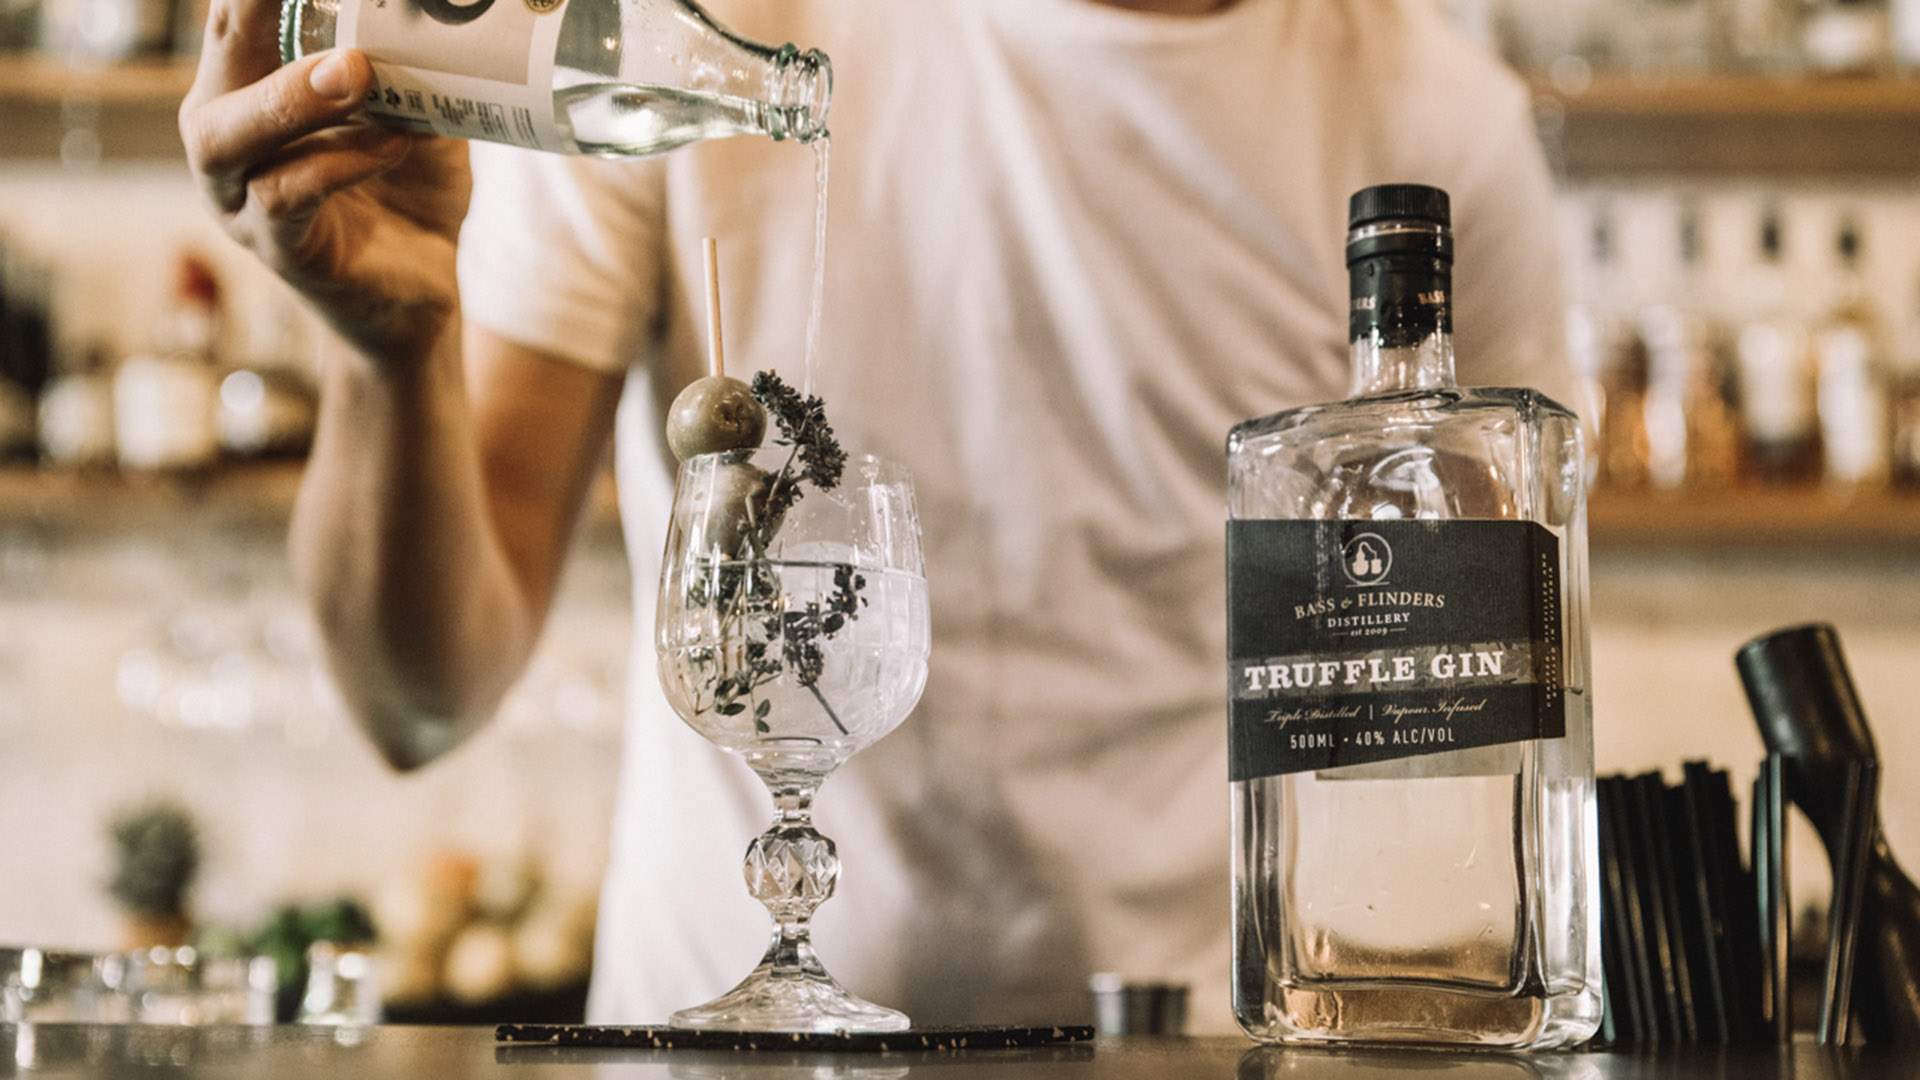 Bass and Flinders' Truffle-Infused Gin Is Here to Fulfil Your Decadent Drinking Dreams